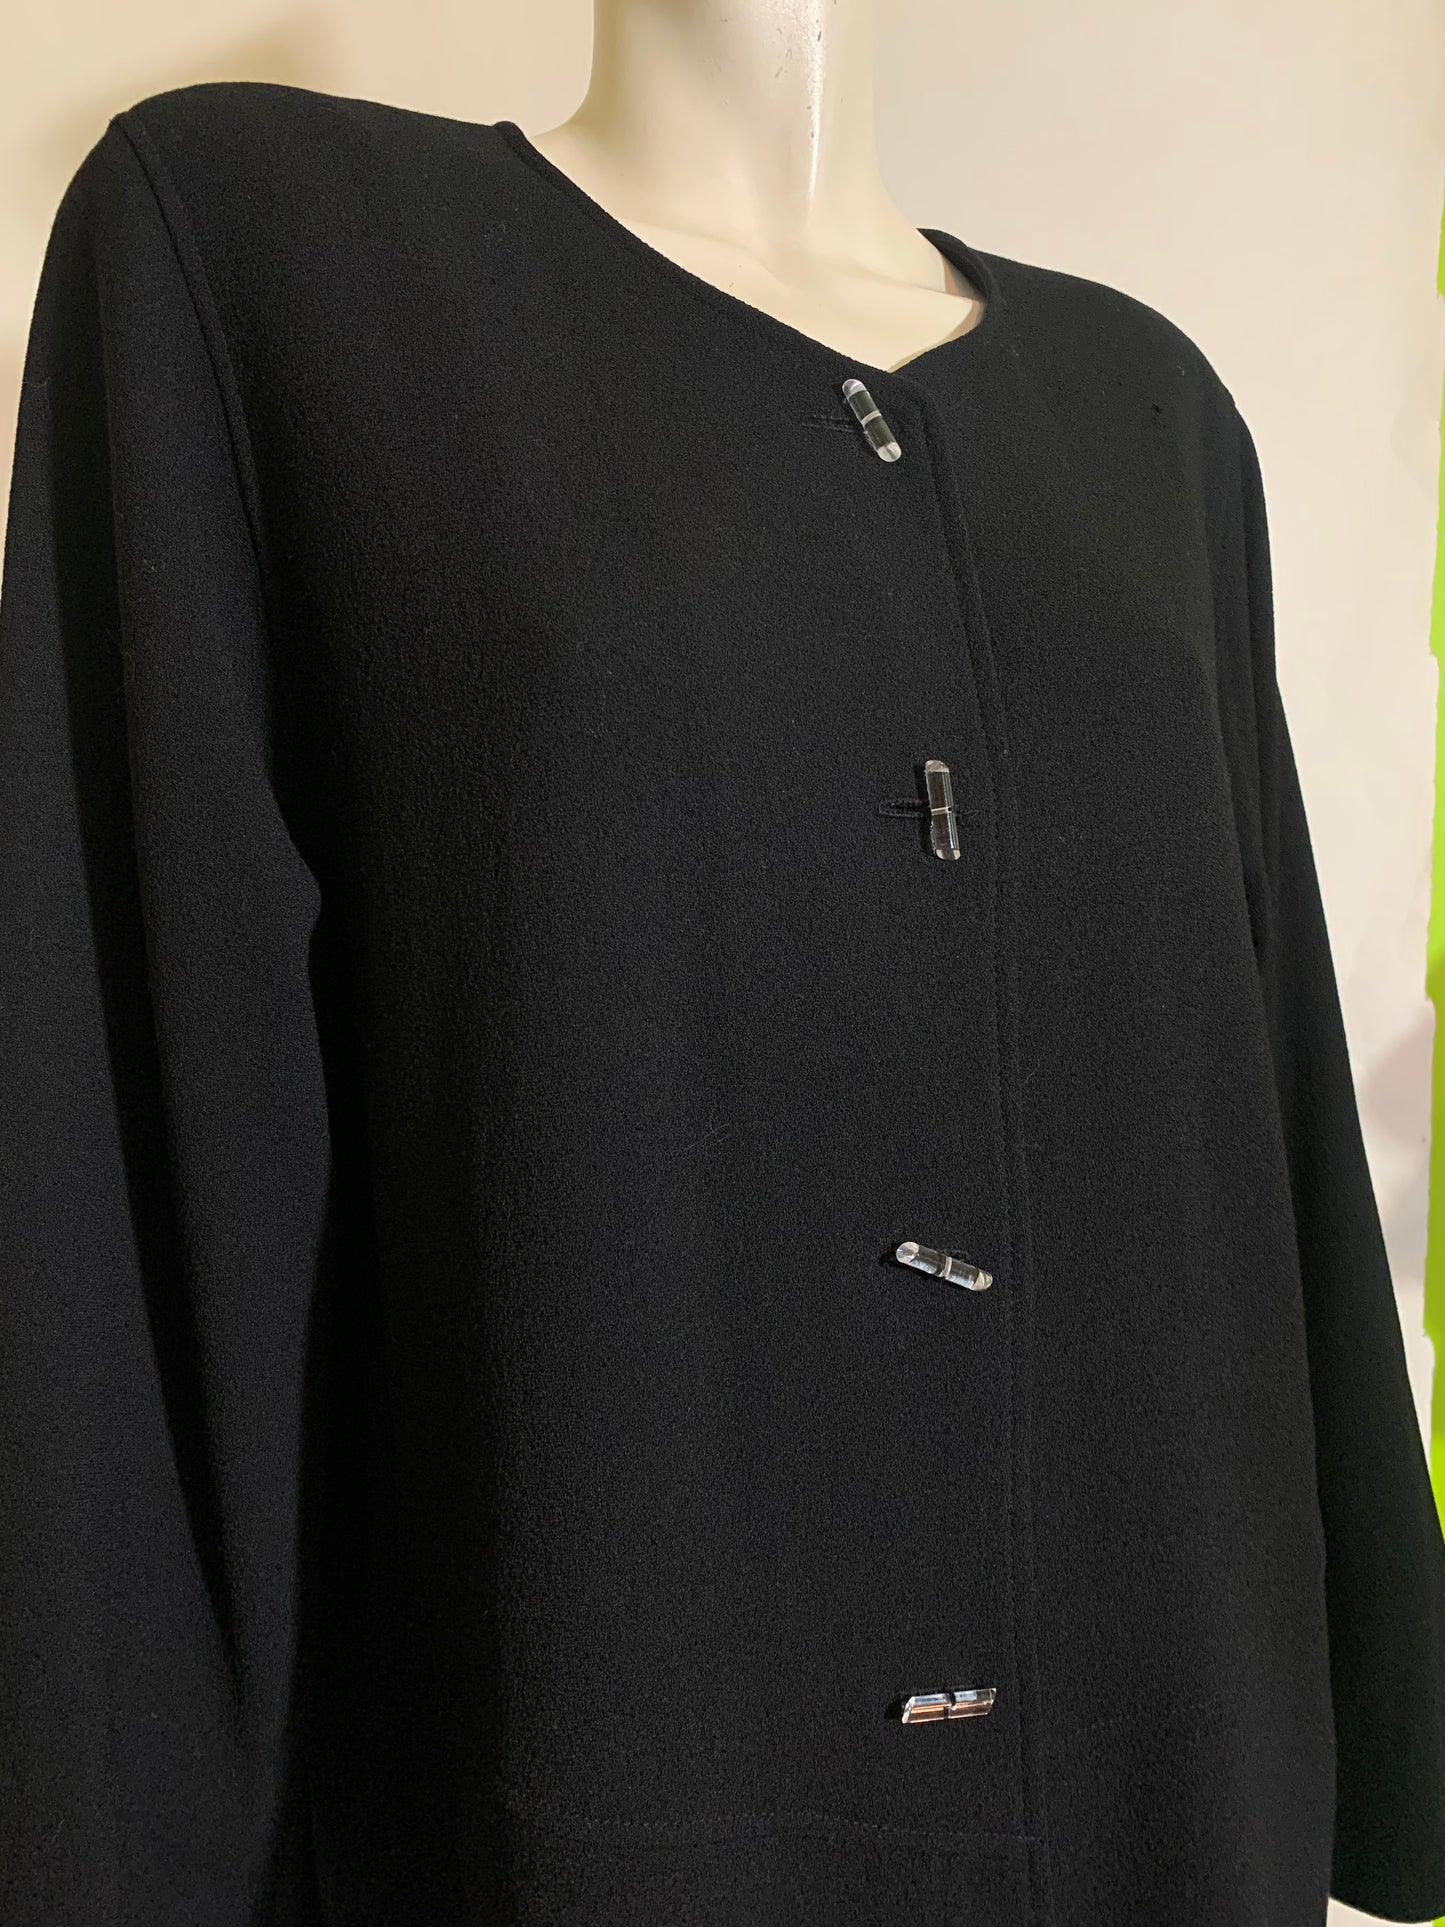 Black Wool Loose Cut Jacket with Lucite Tube Buttons circa 1990s Jean Muir